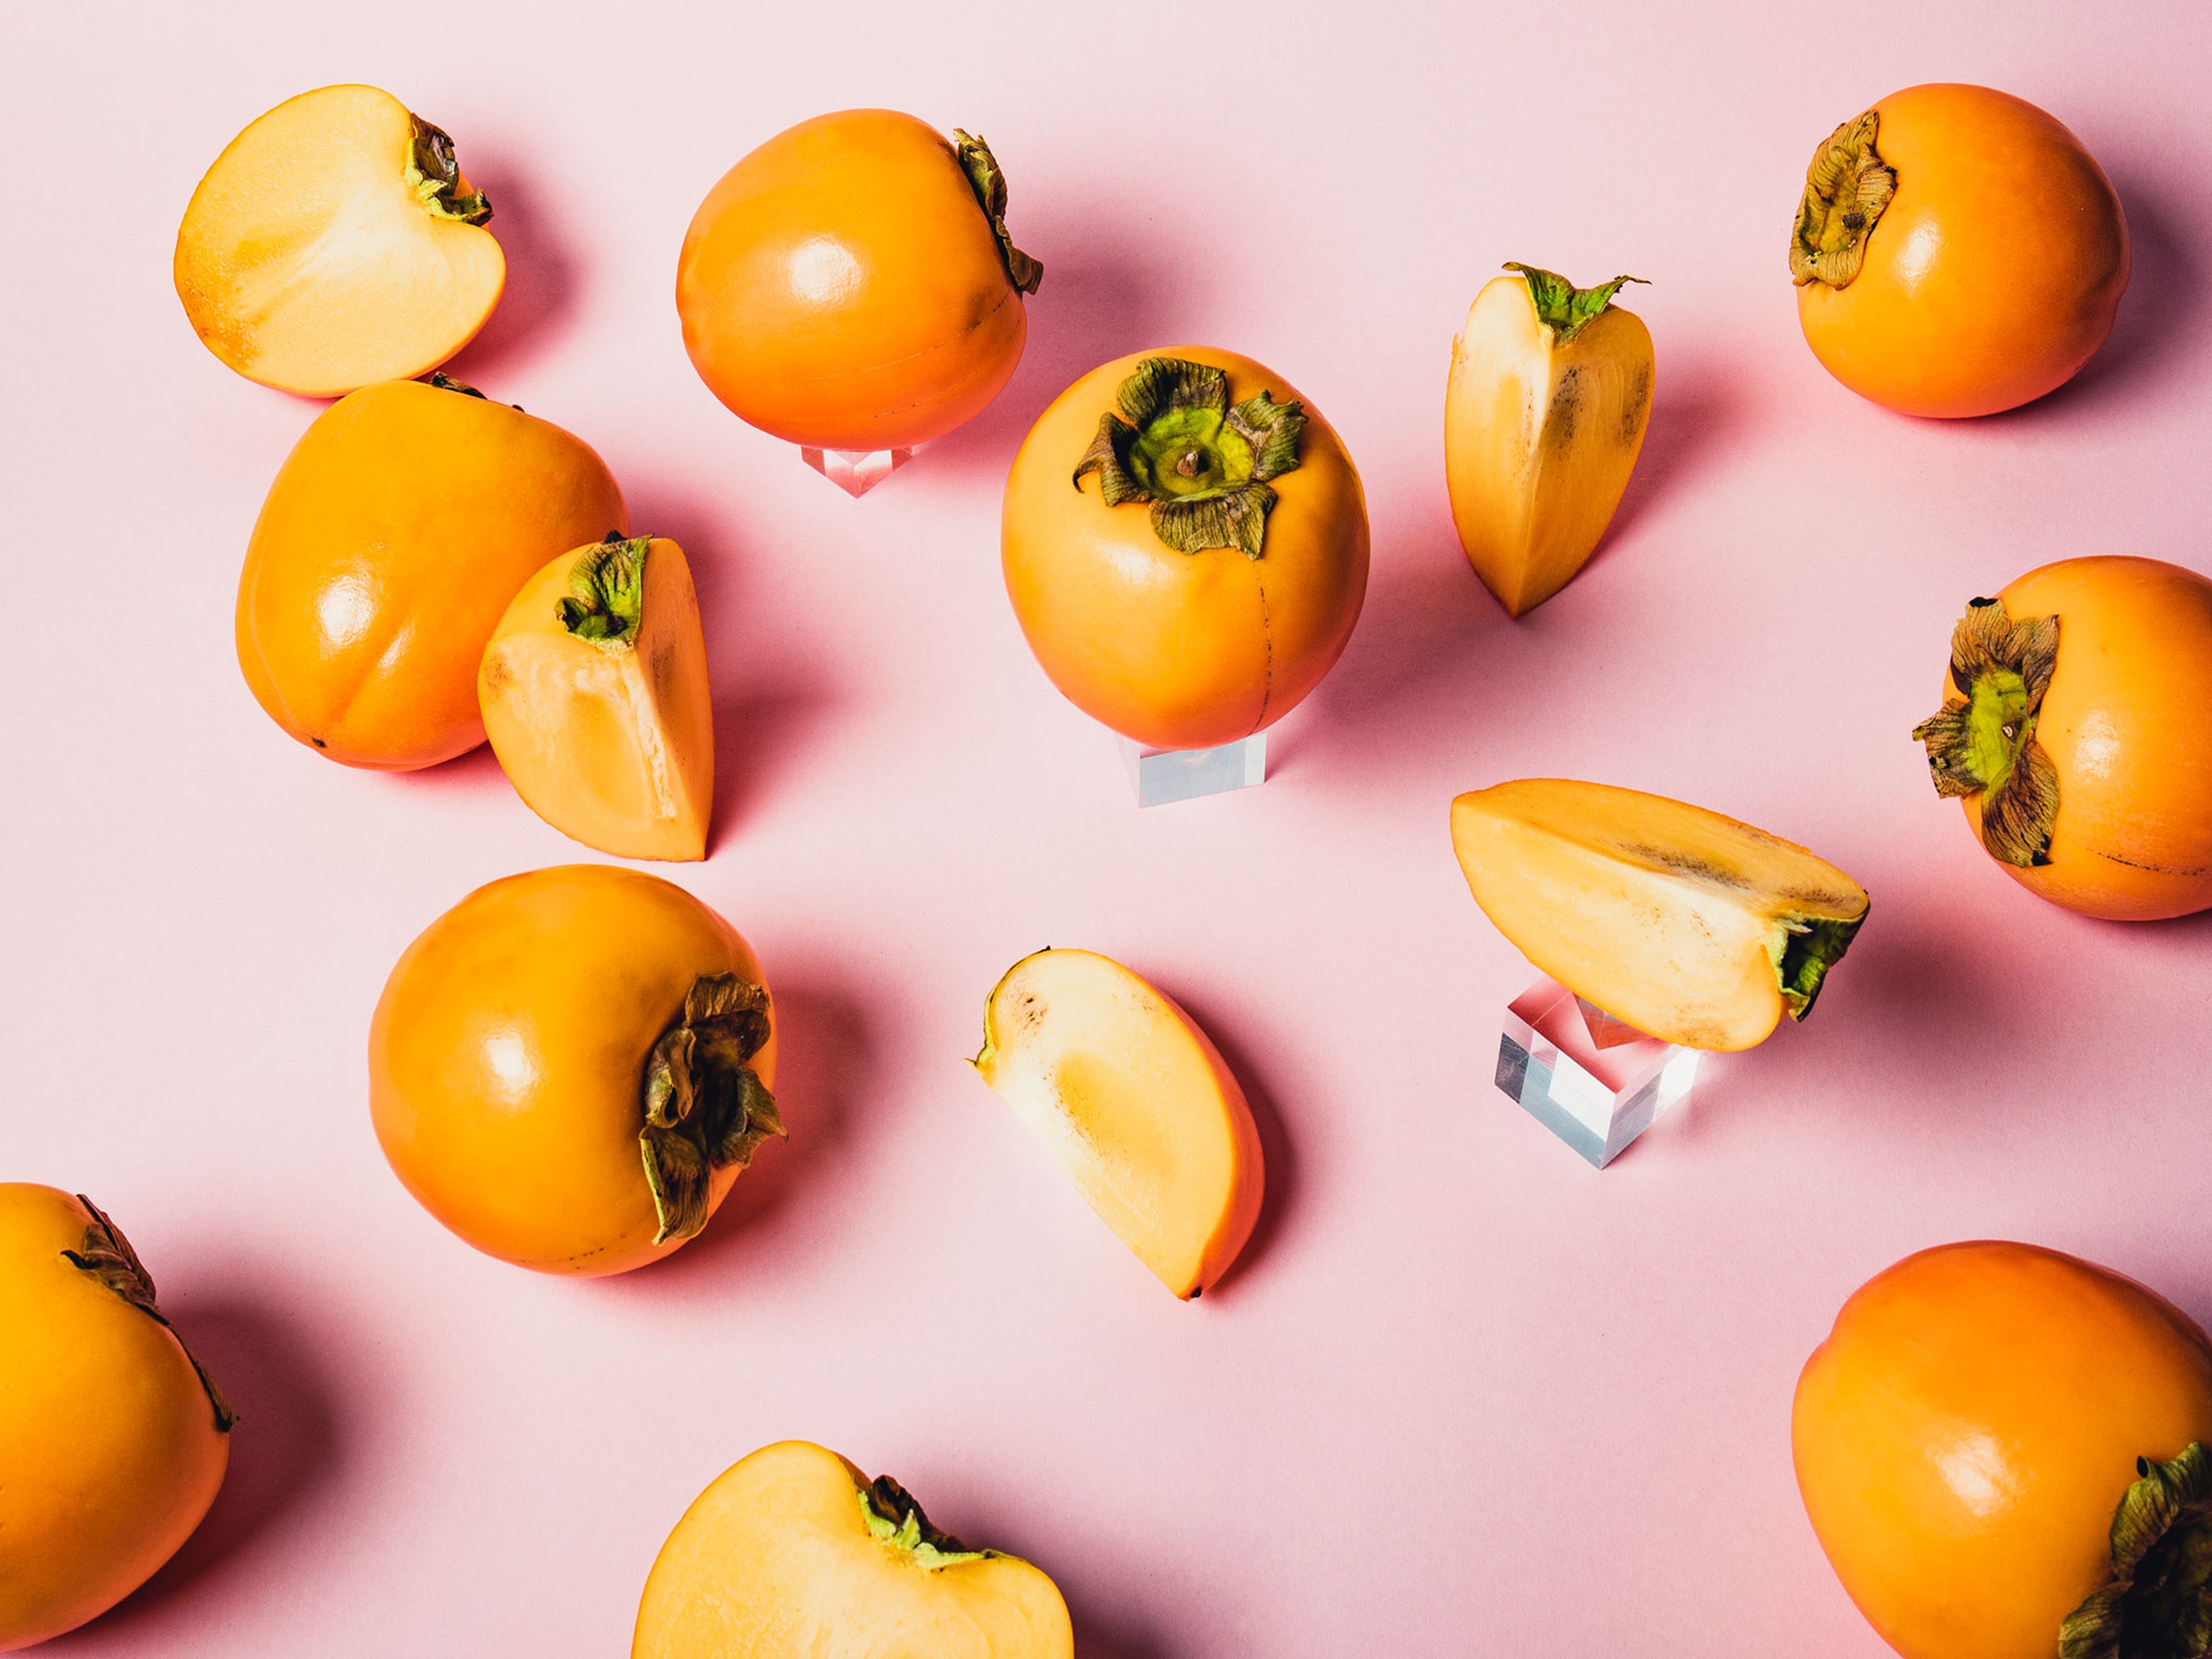 Now in Season: Everything to Know About Shopping, Storing, and Preparing In Season Persimmon